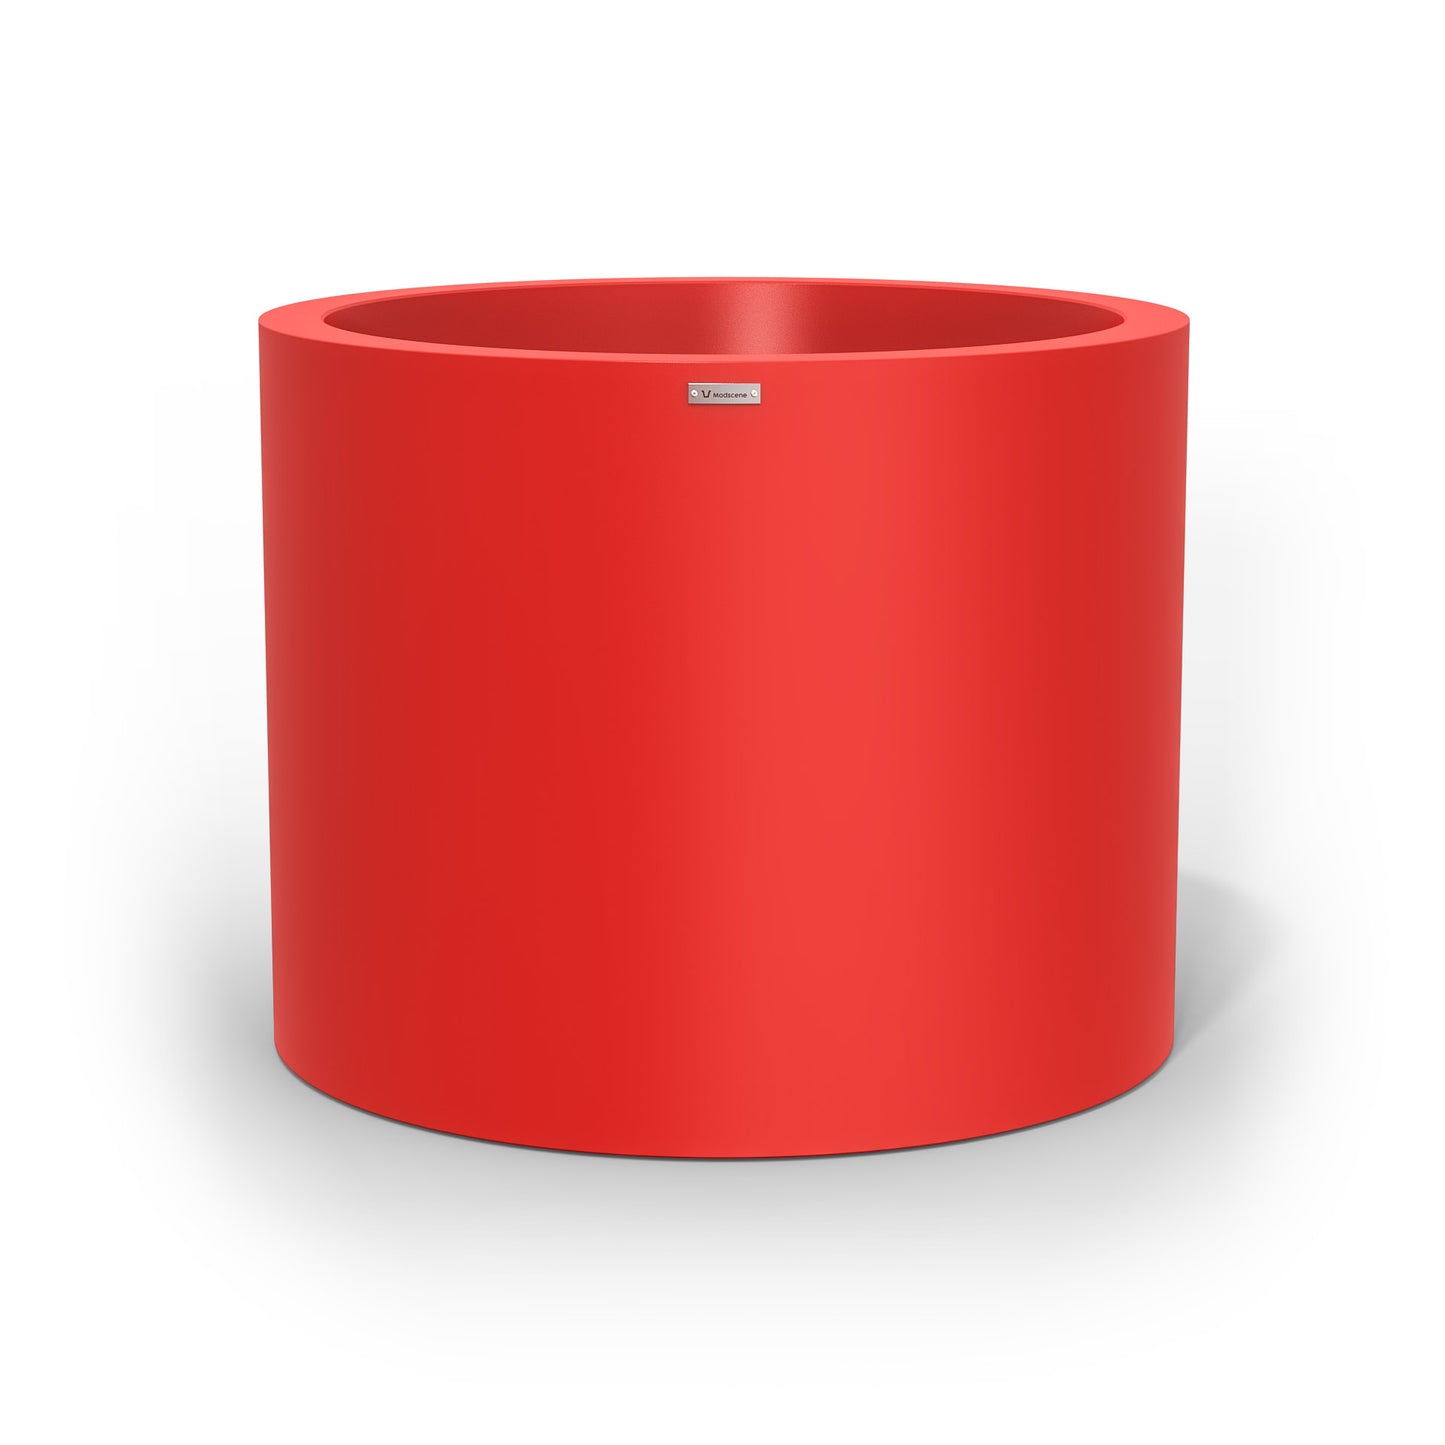 An extra large cylinder pot planter in red. Made by Modscene New Zealand.